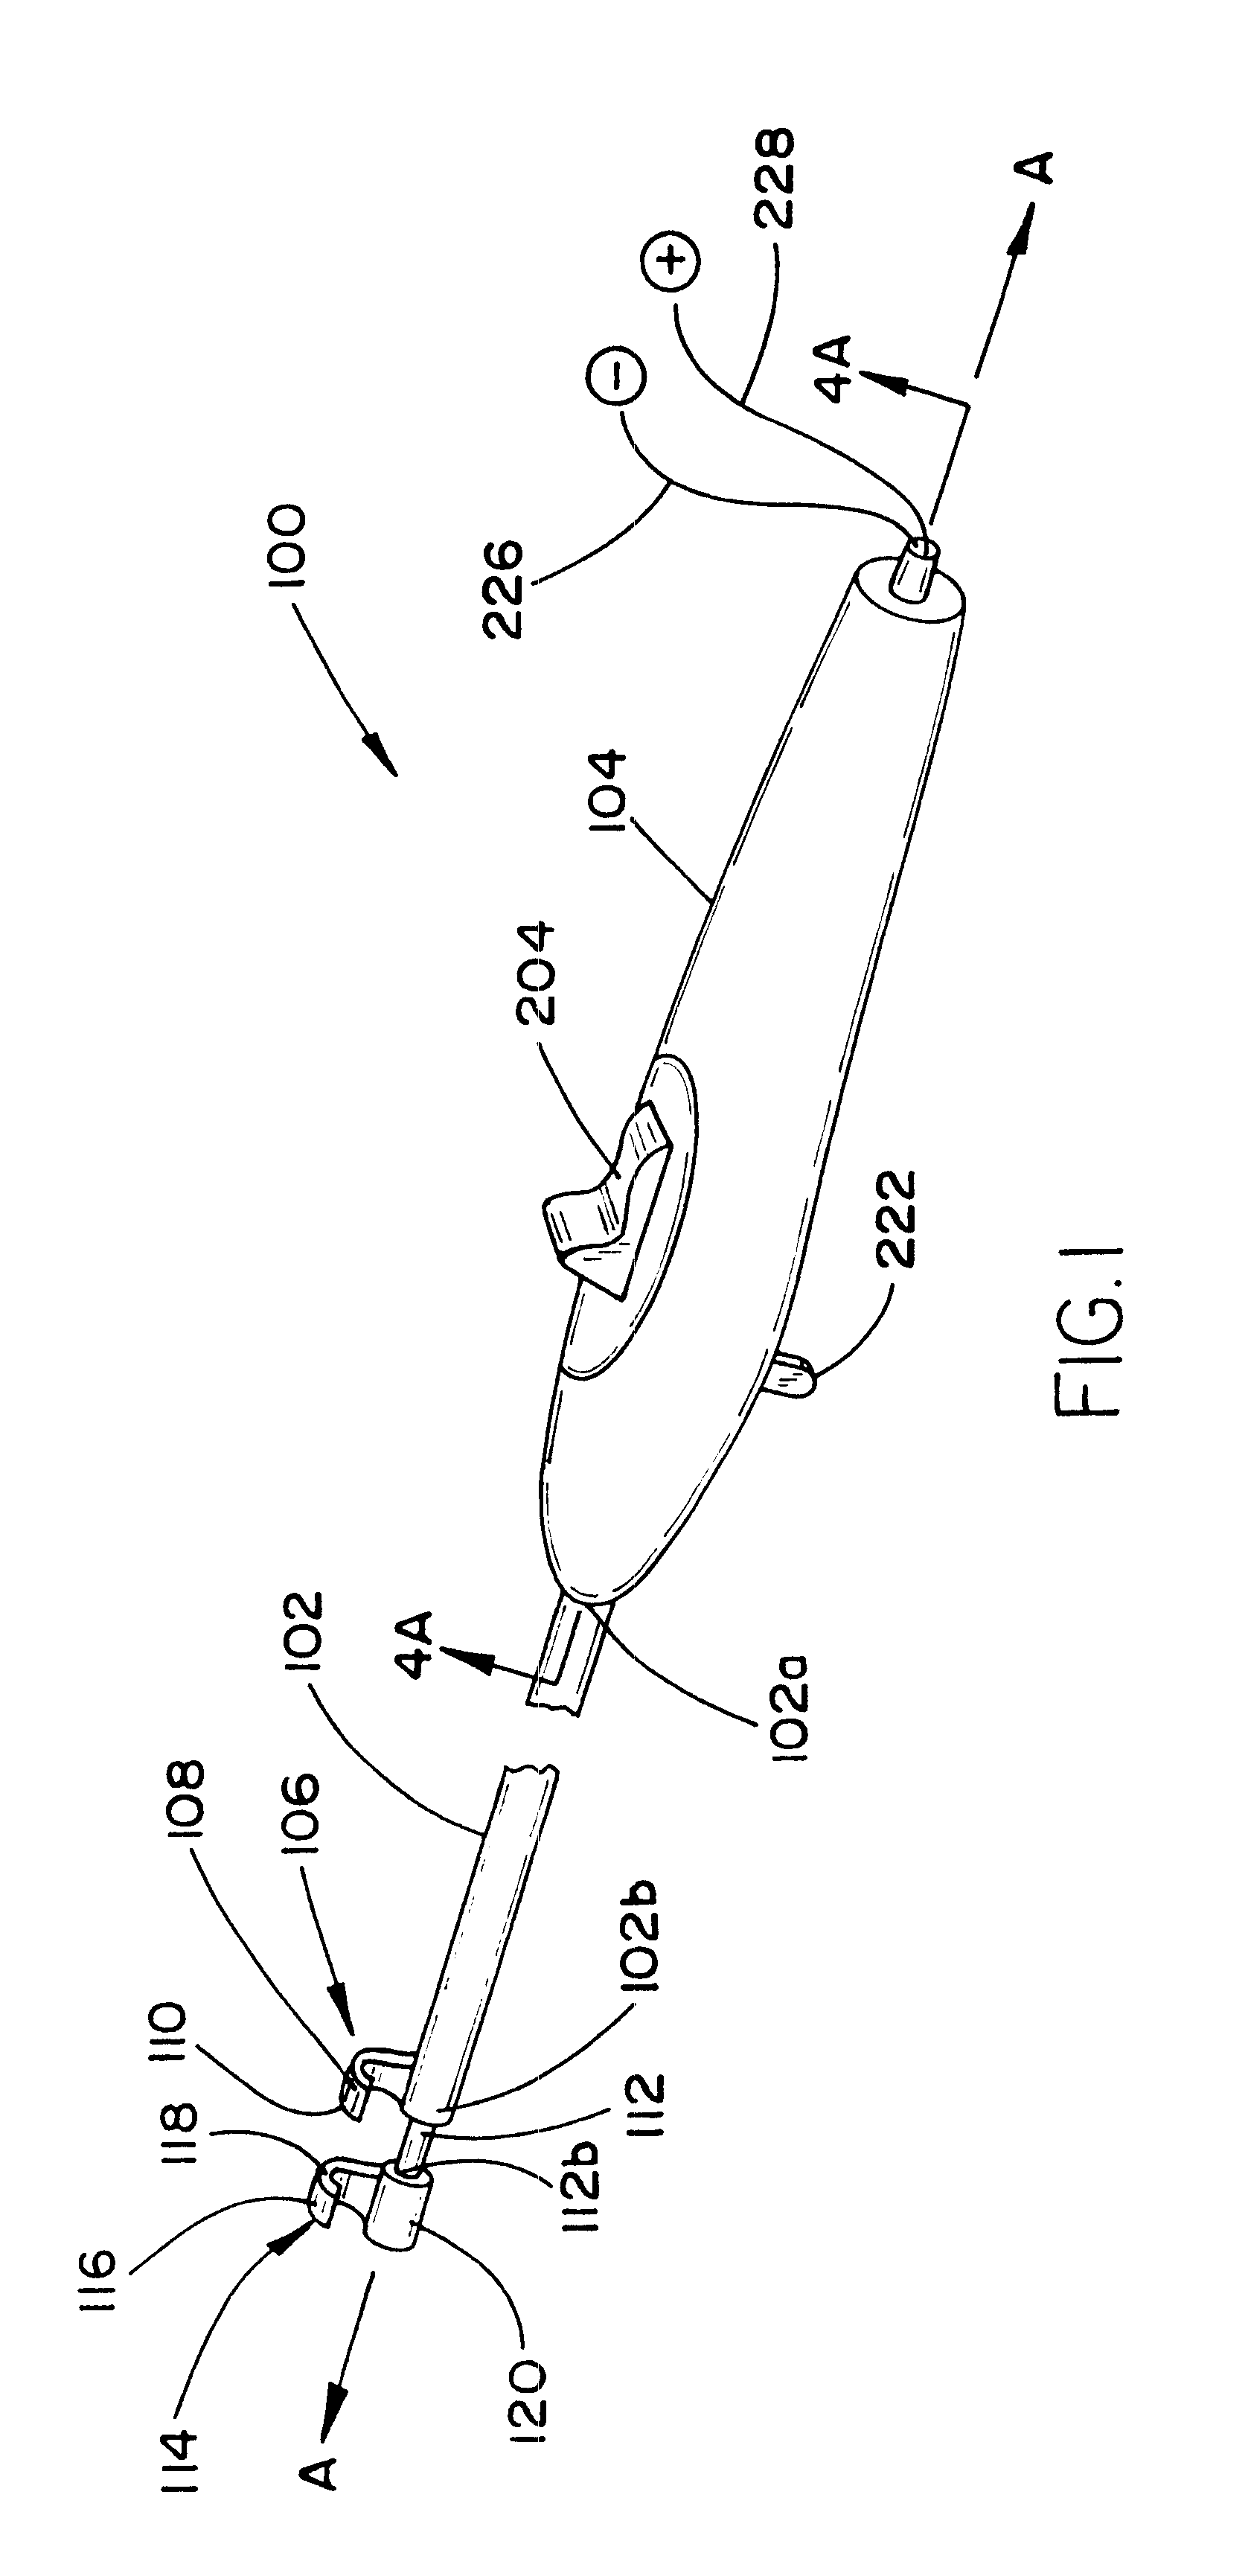 Surgical device for endoscopic vein harvesting